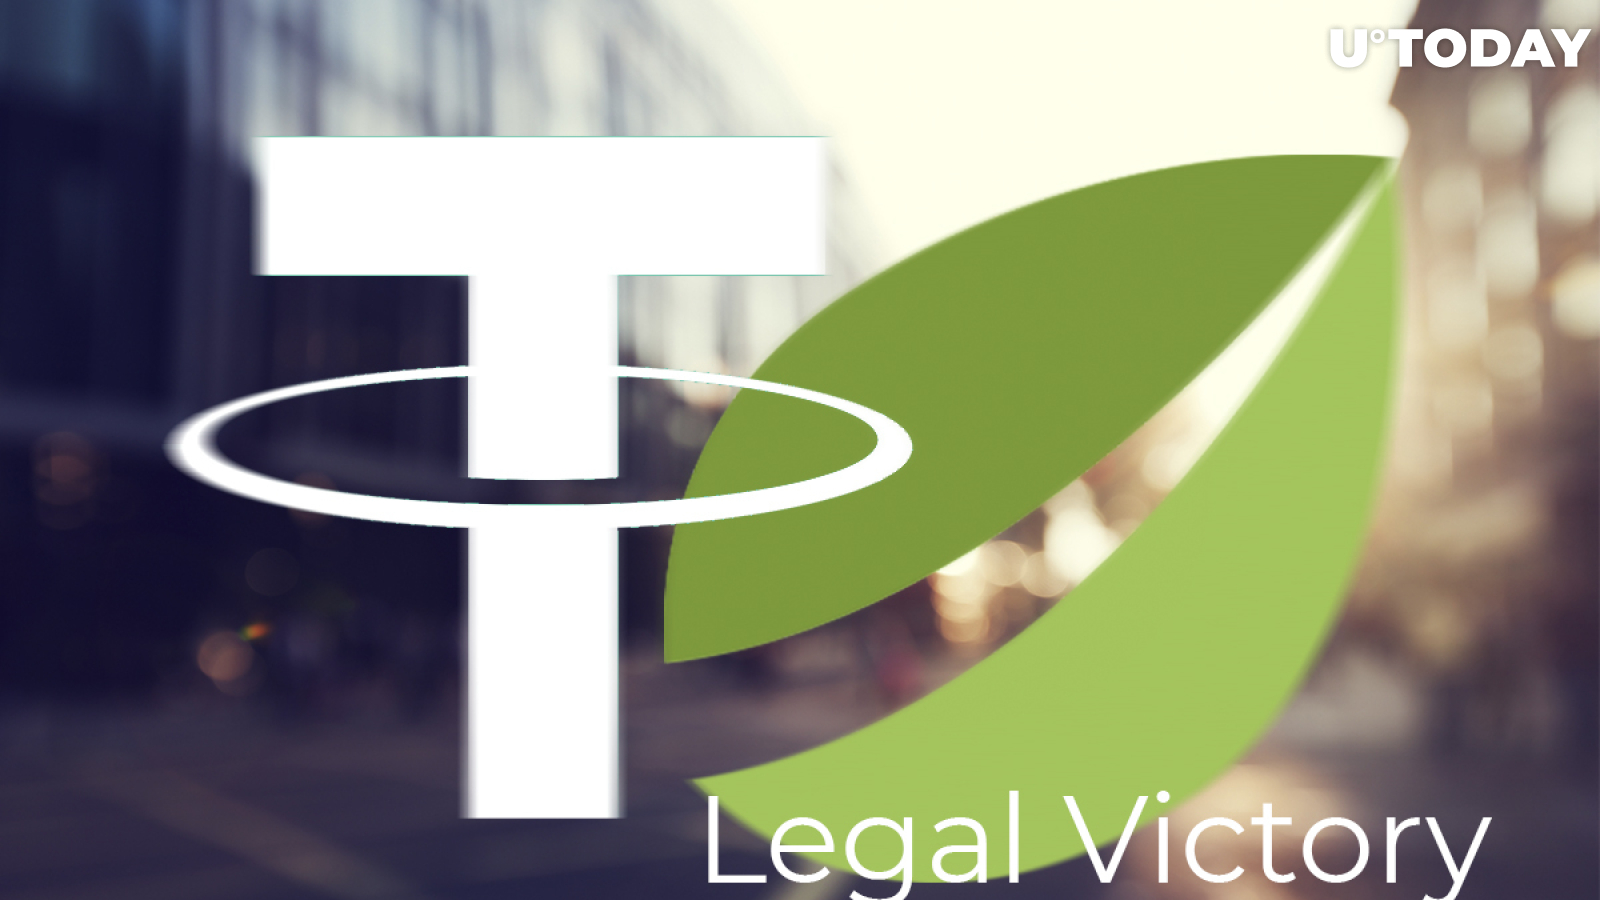 Cryptocurrency Exchange Bitfinex and Tether Score Another Legal Victory